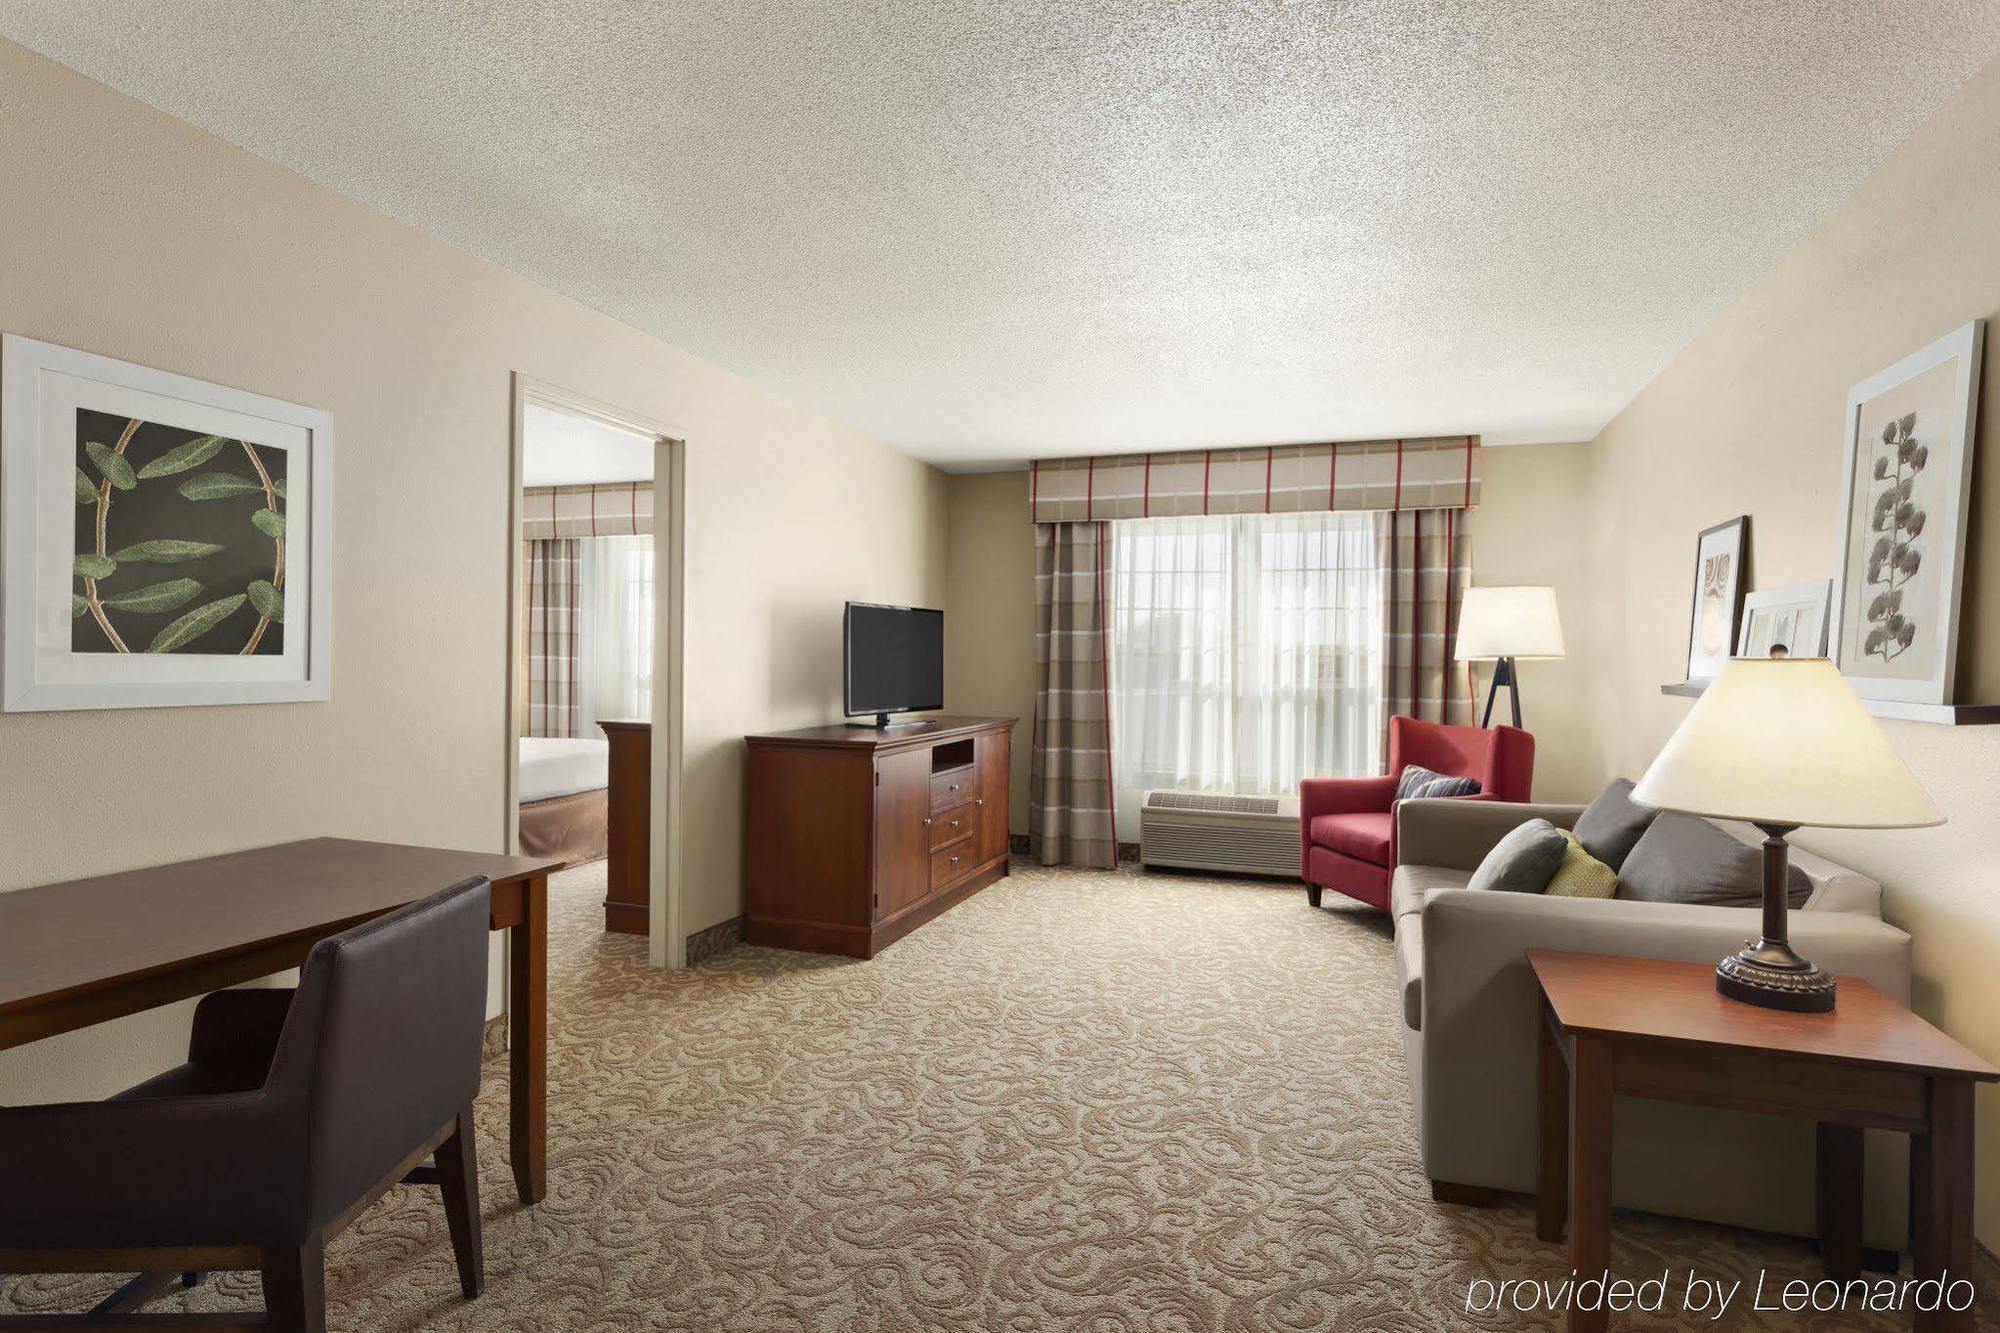 Country Inn & Suites By Radisson, Fort Dodge, Ia 외부 사진